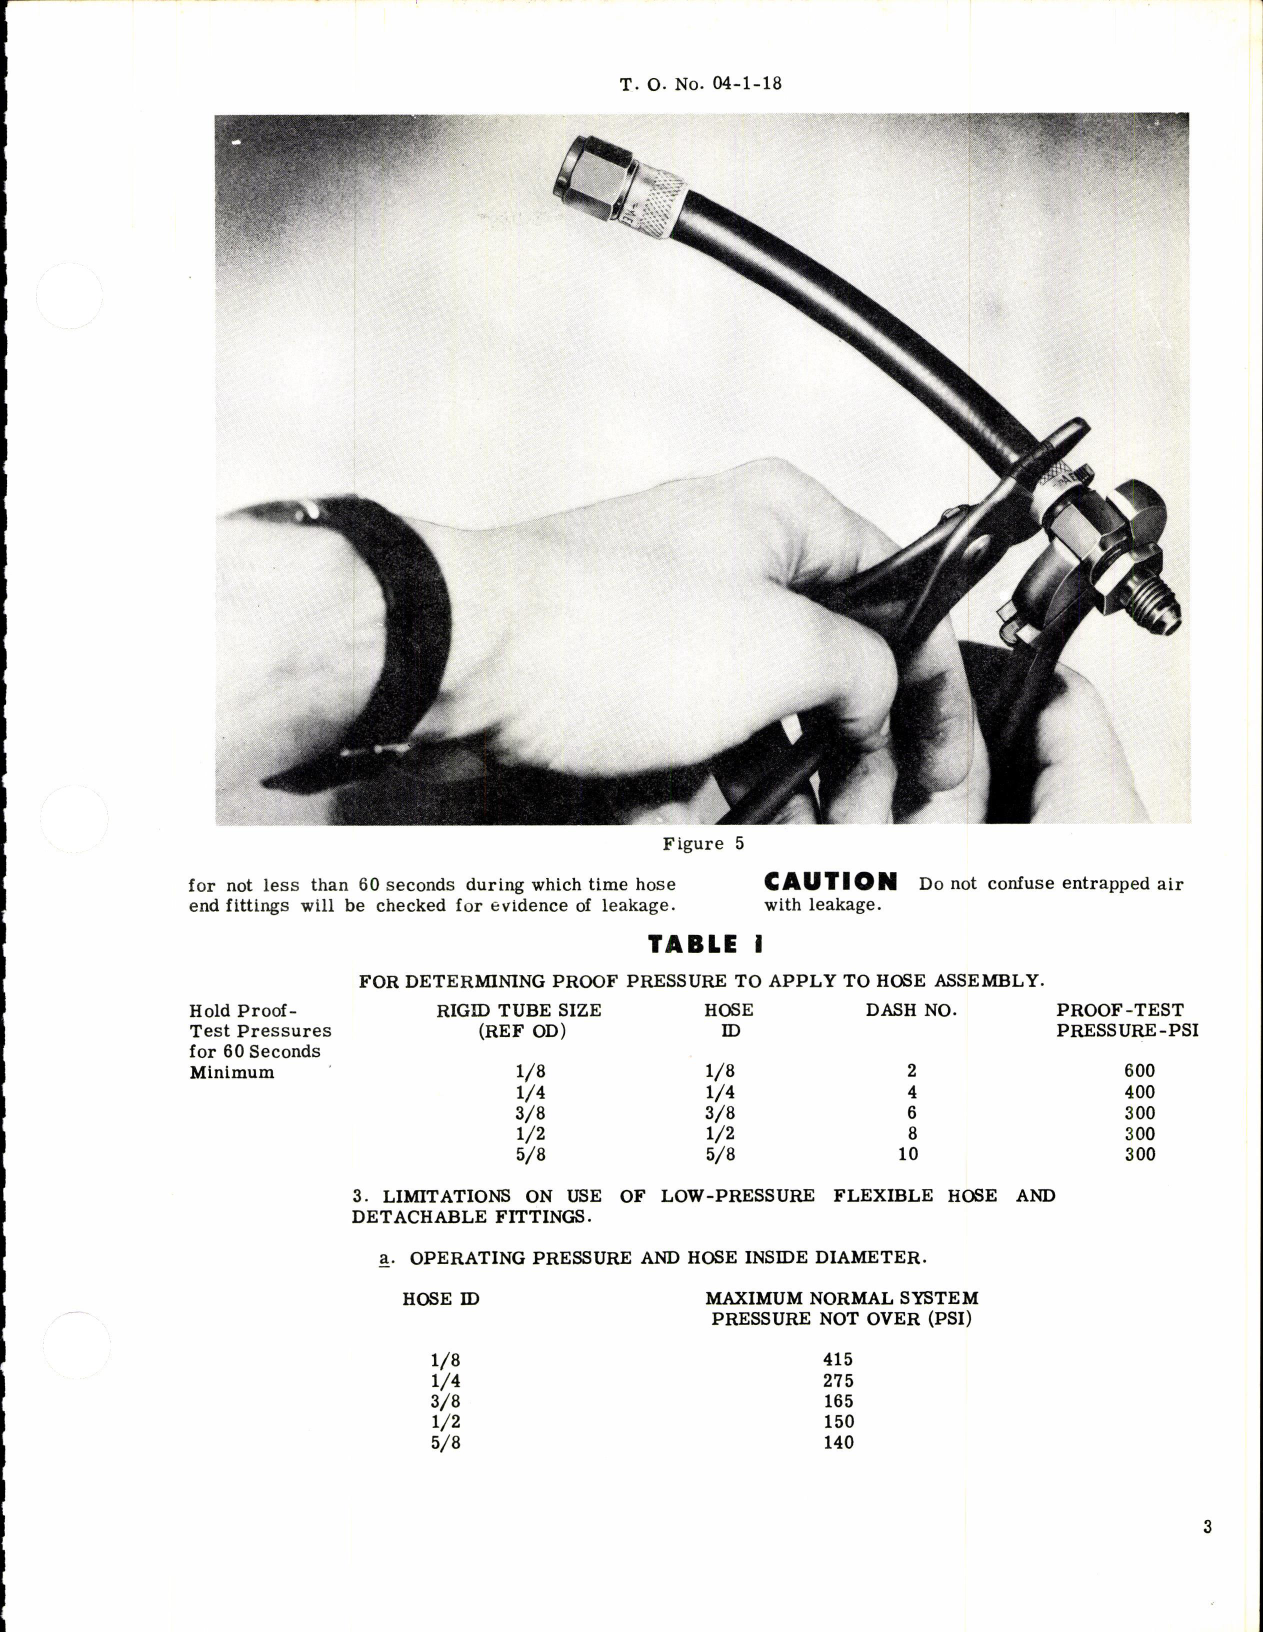 Sample page 3 from AirCorps Library document: Replacement of Low-Pressure Flexible Hose Assemblies